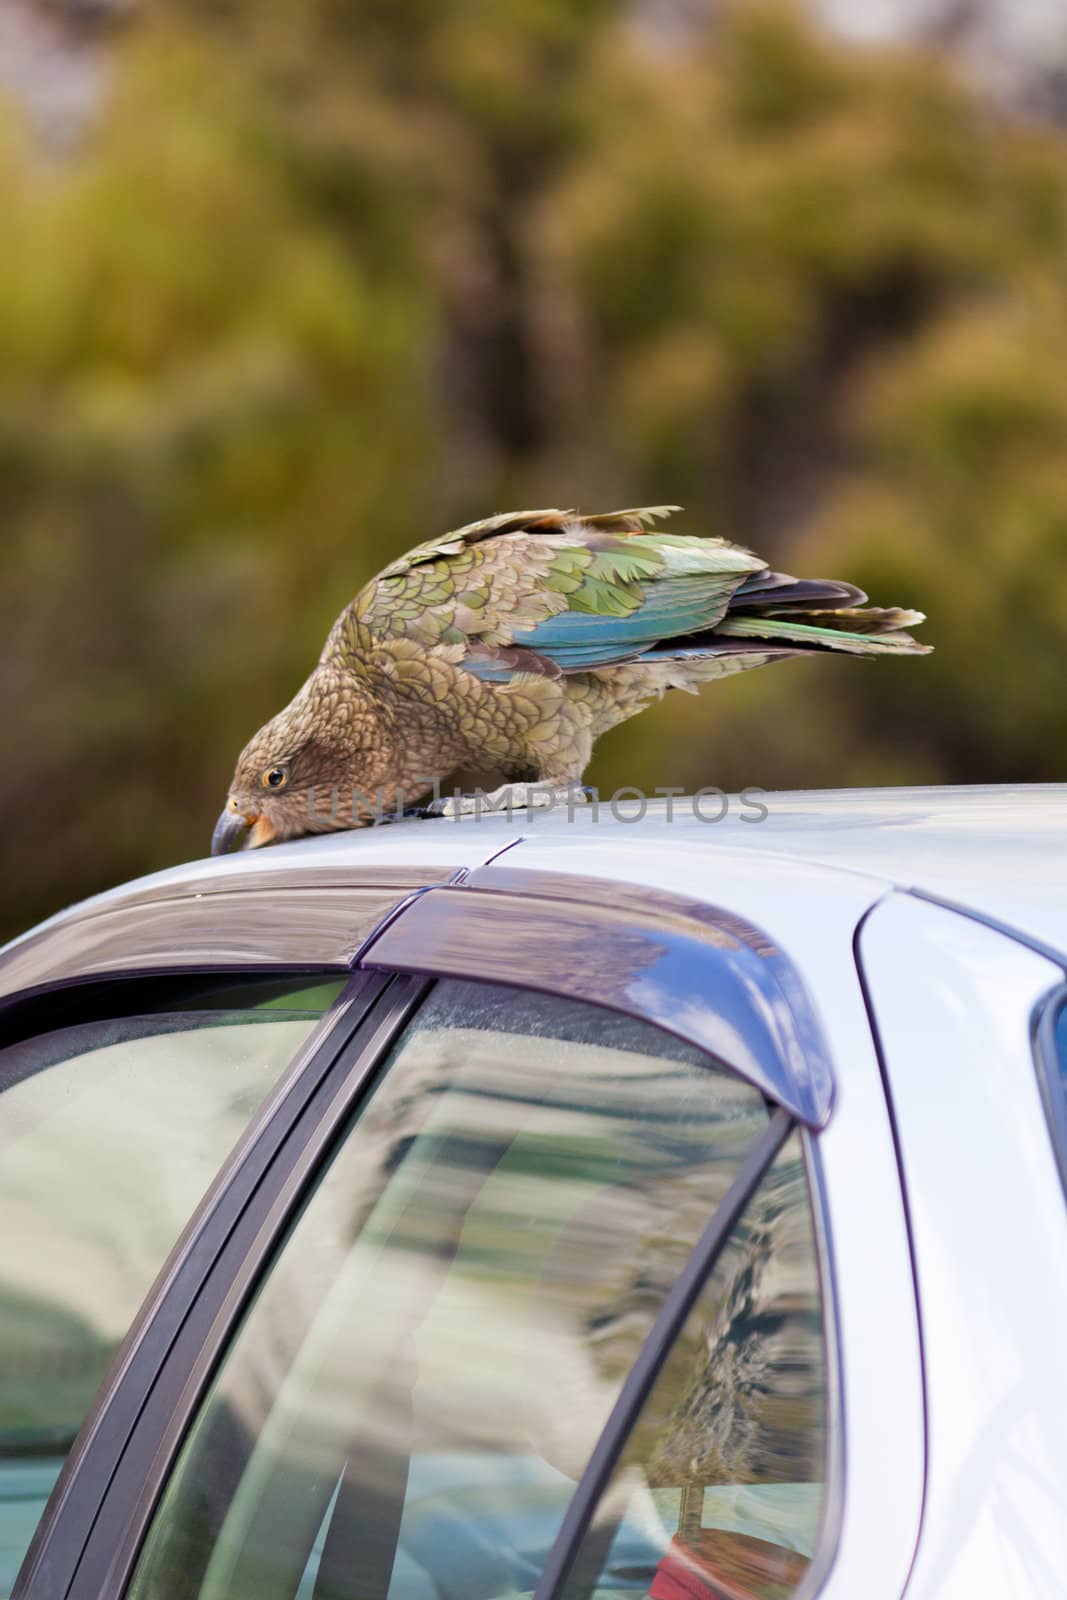 NZ alpine parrot Kea trying to vandalize a car by PiLens